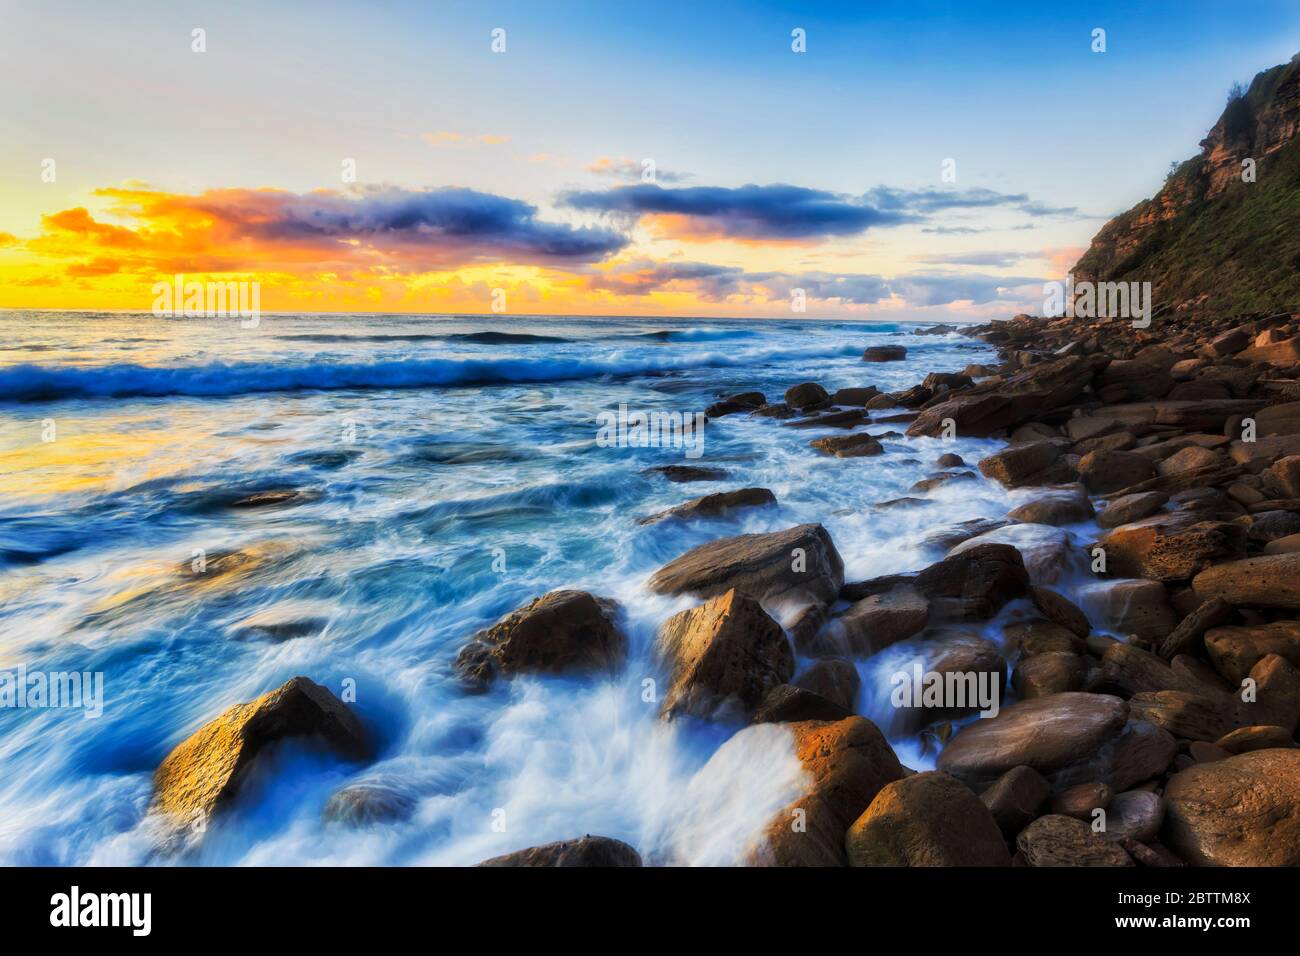 Round eroded rocks at Sydney Northern beaches washed by endless waves of Pacific ocean. Stock Photo